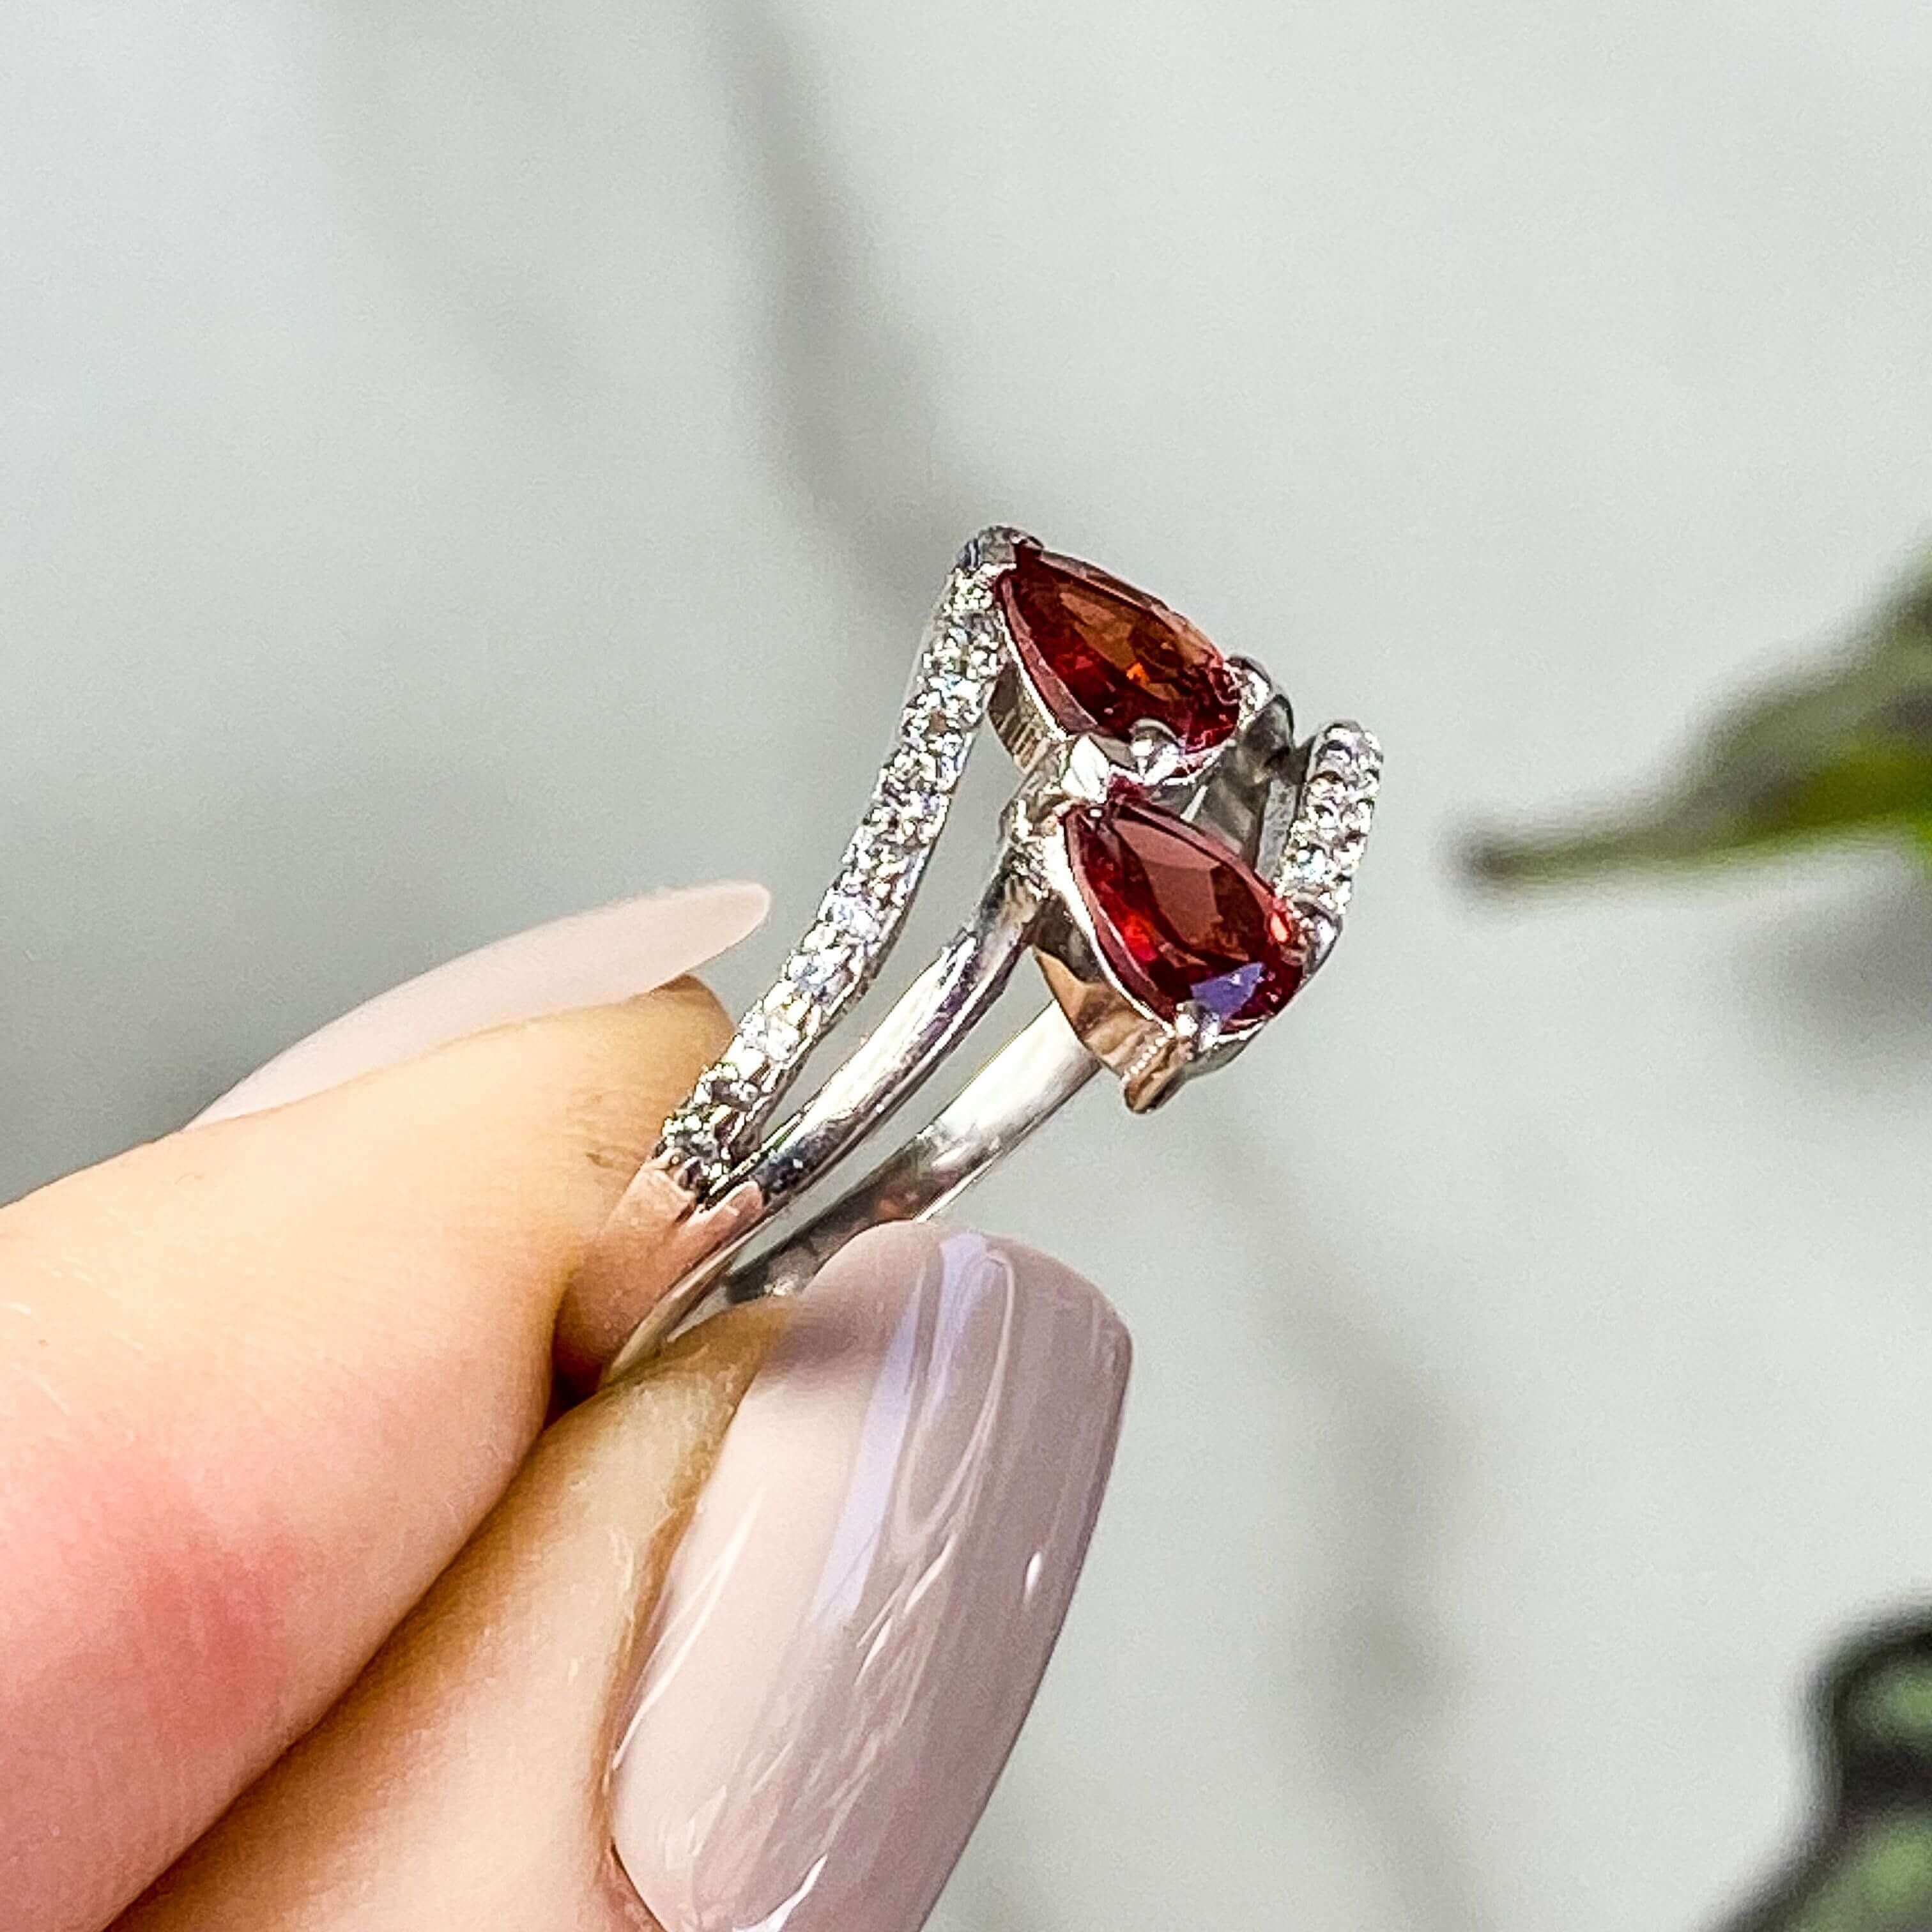 Garnet Ring with CZ Accents | Size 7.75 Mooncat Crystals